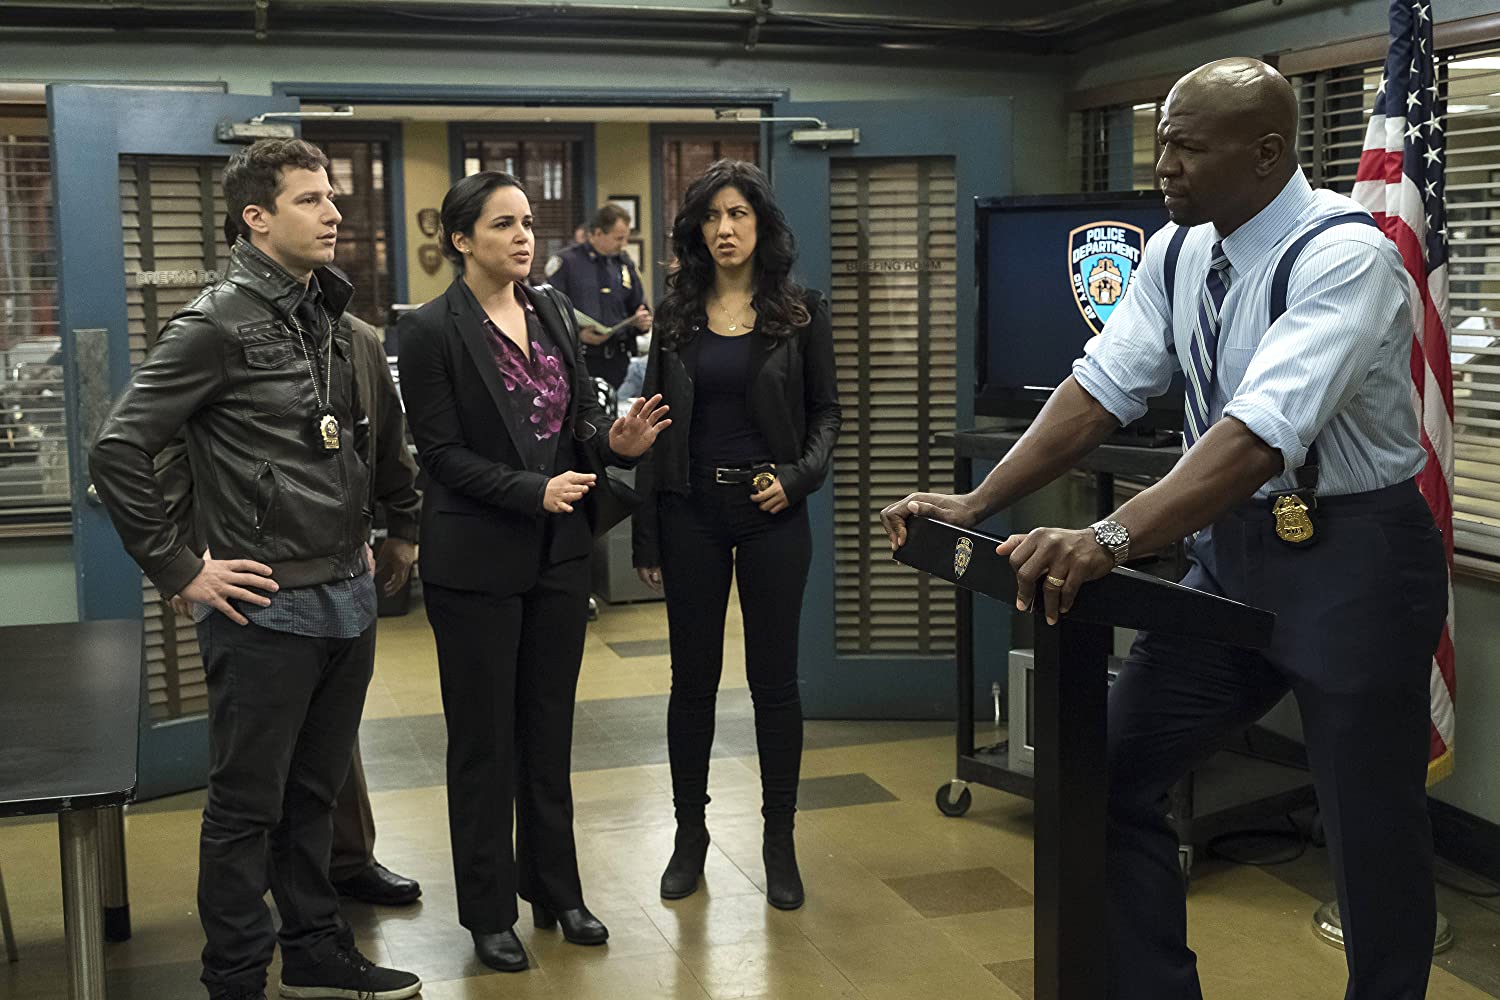 Terry Crews gives a speech at the precinct while the others look on